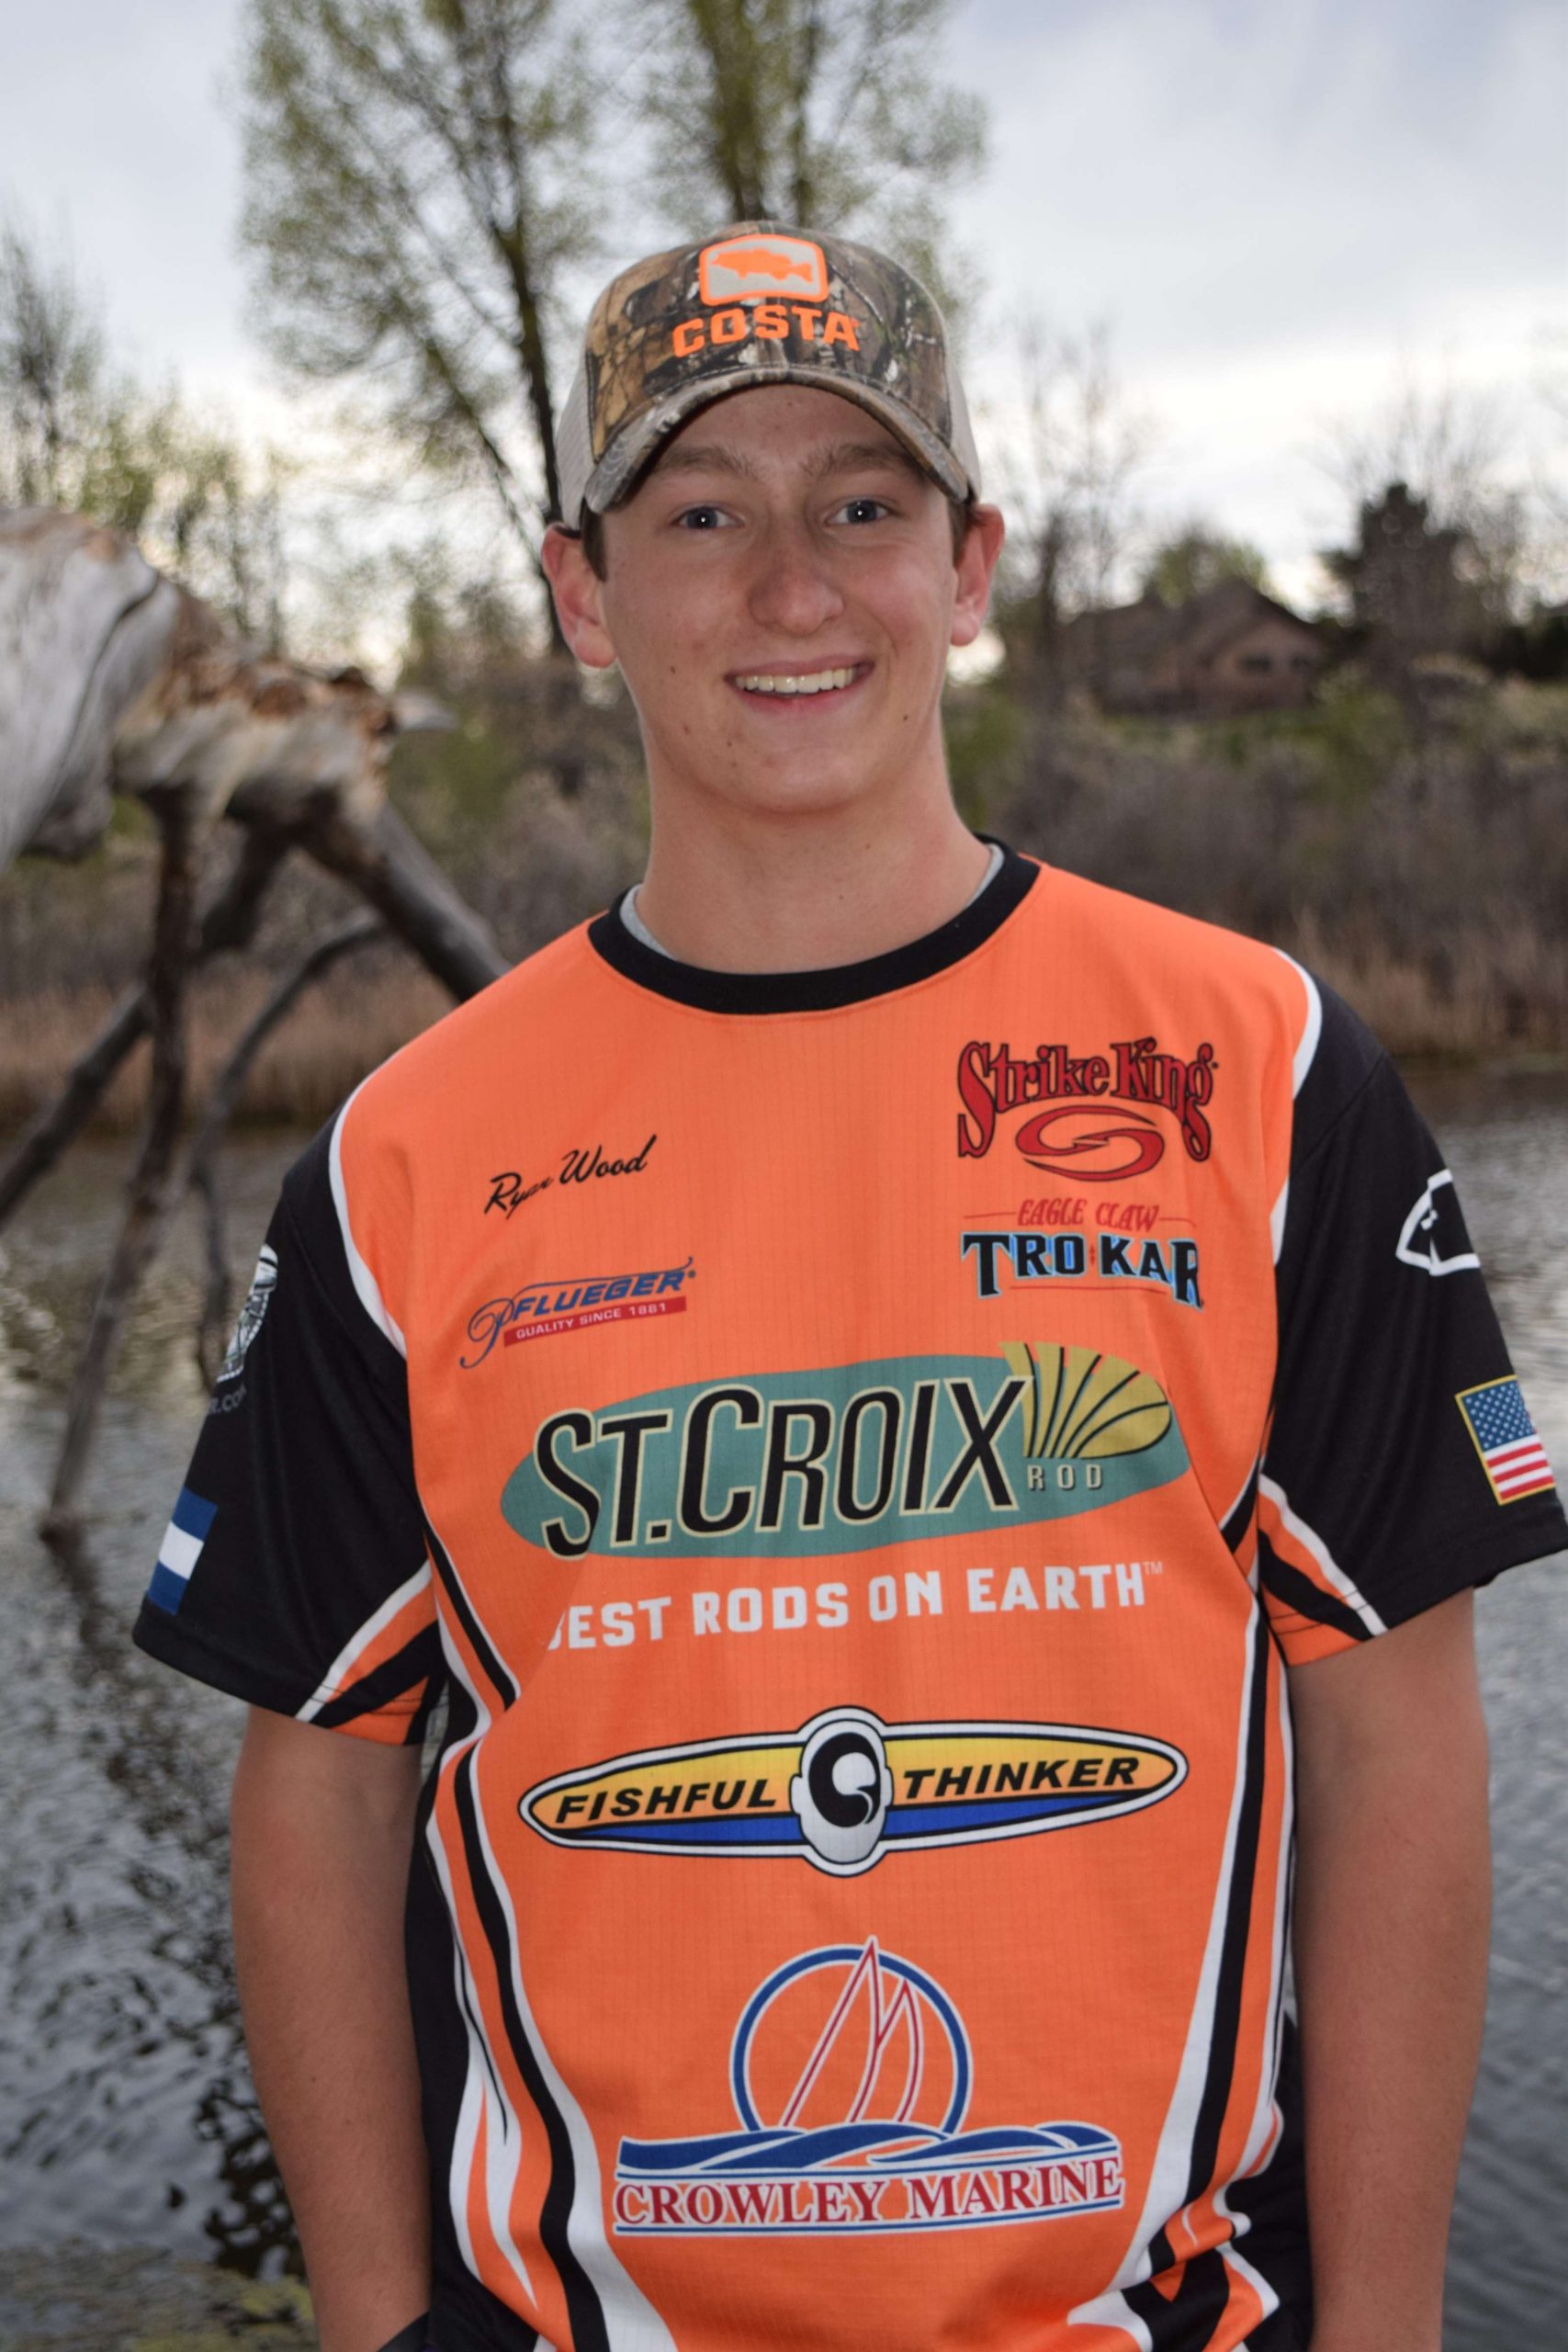 <p>Colorado: Ryan Wood</p>
<p>
Wood is a junior at Legacy High School. Last year, he won the prestigious Costa Bright Future Scholarship award, and he has several tournament wins to his credit, including the 2013 Bassmaster Junior World Championship. Wood was awarded a conservation grant in March on behalf of his high school club and the Colorado Department of Parks and Wildlife to refurbish and add structure to a pond in Denver to be used for kids' fishing seminars.